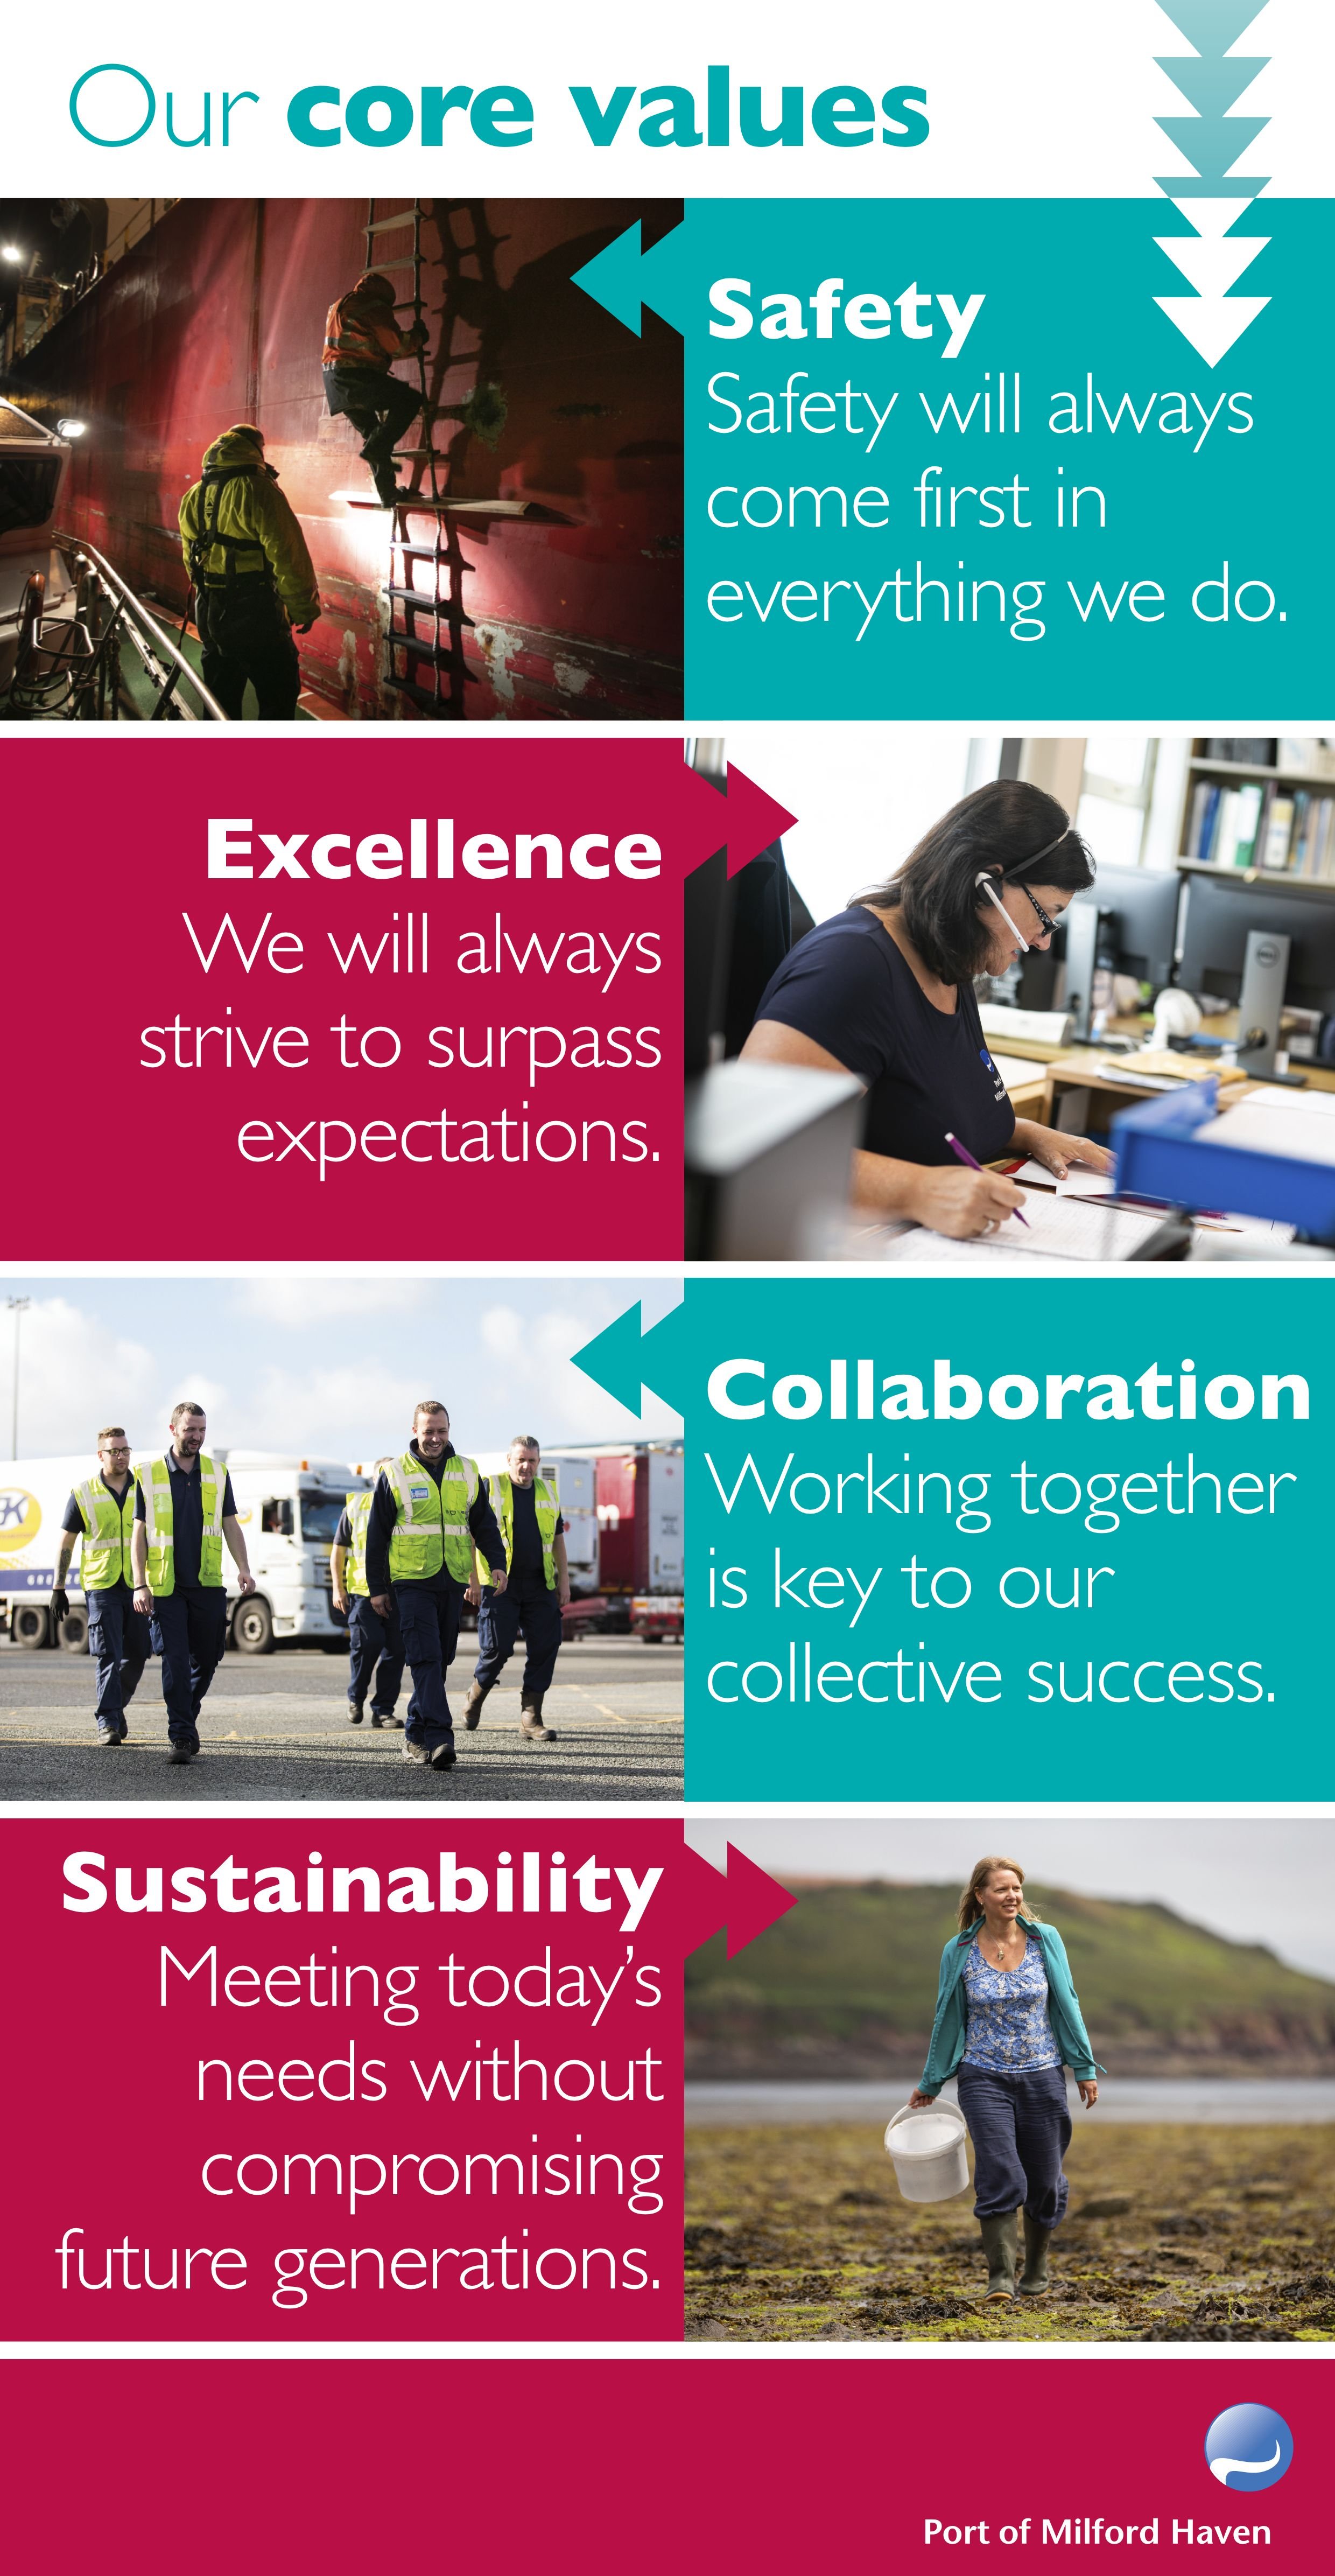 Core Values at the Port of Milford Haven